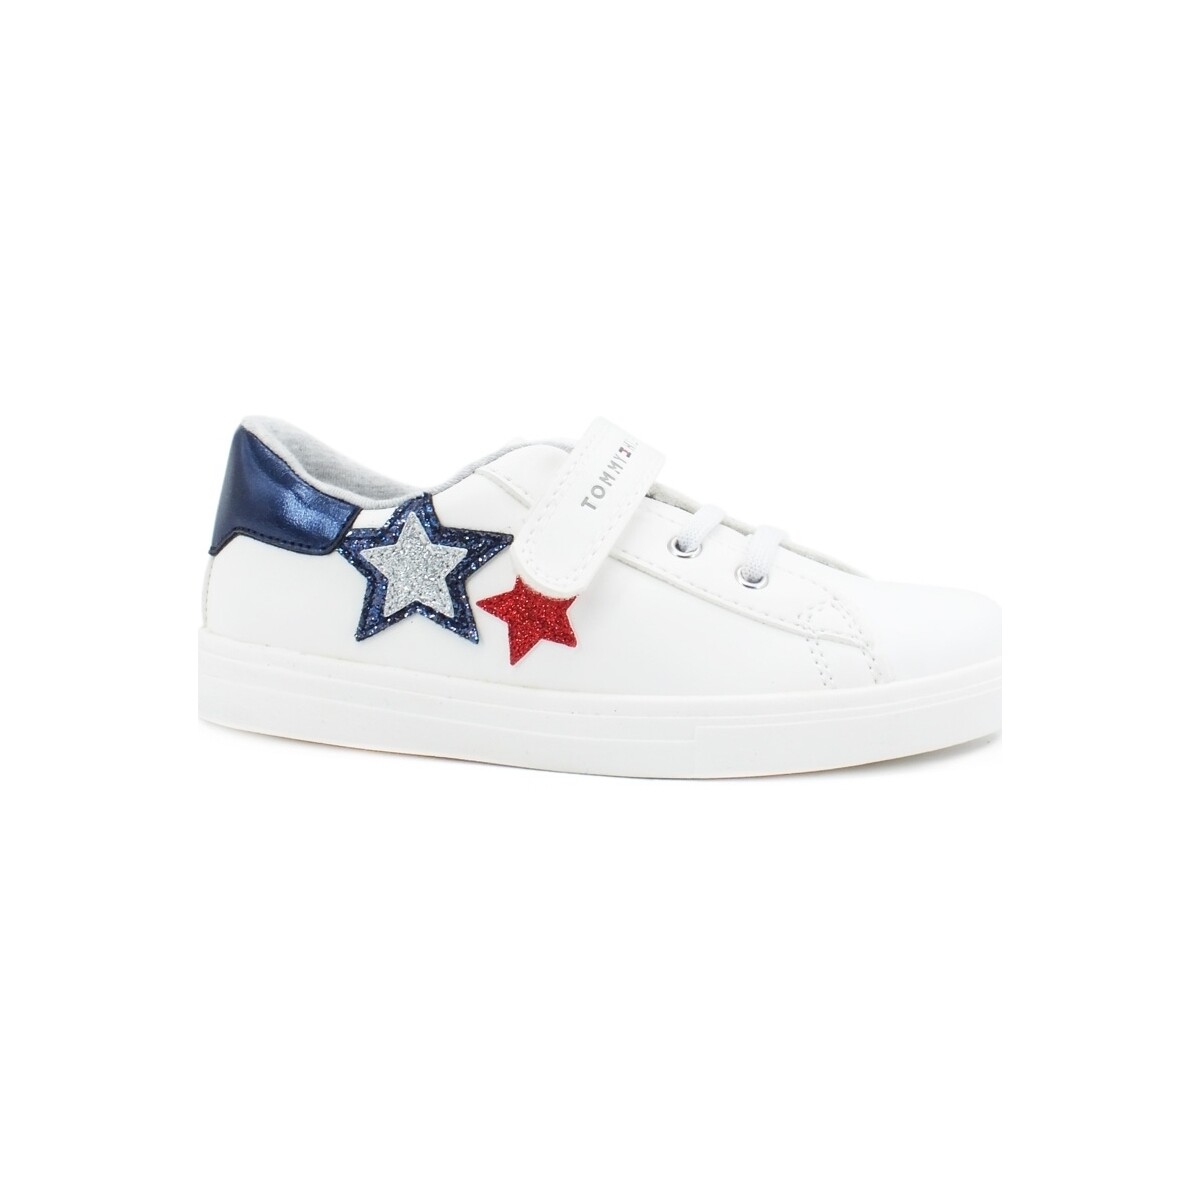 Chaussures Fille Multisport Tommy Hilfiger Sneaker White Blue Red T1A4-30611 Blanc